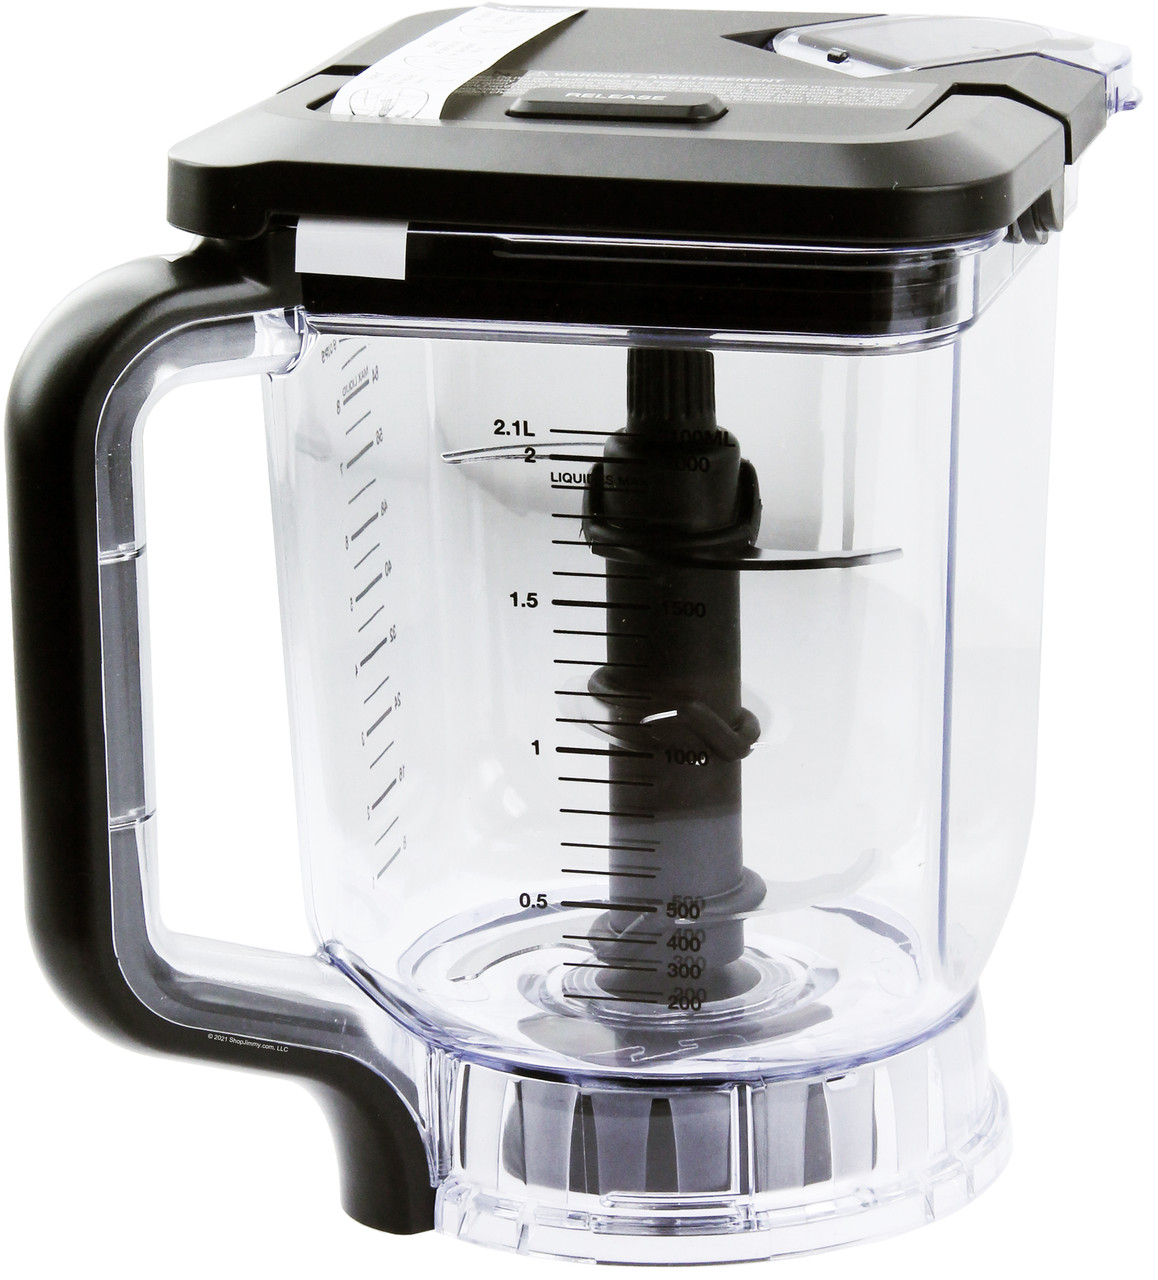 NINJA 6-blade Professional Blender Replacement Part for 72oz Mixing Pitcher  Jug. Ships FAST 